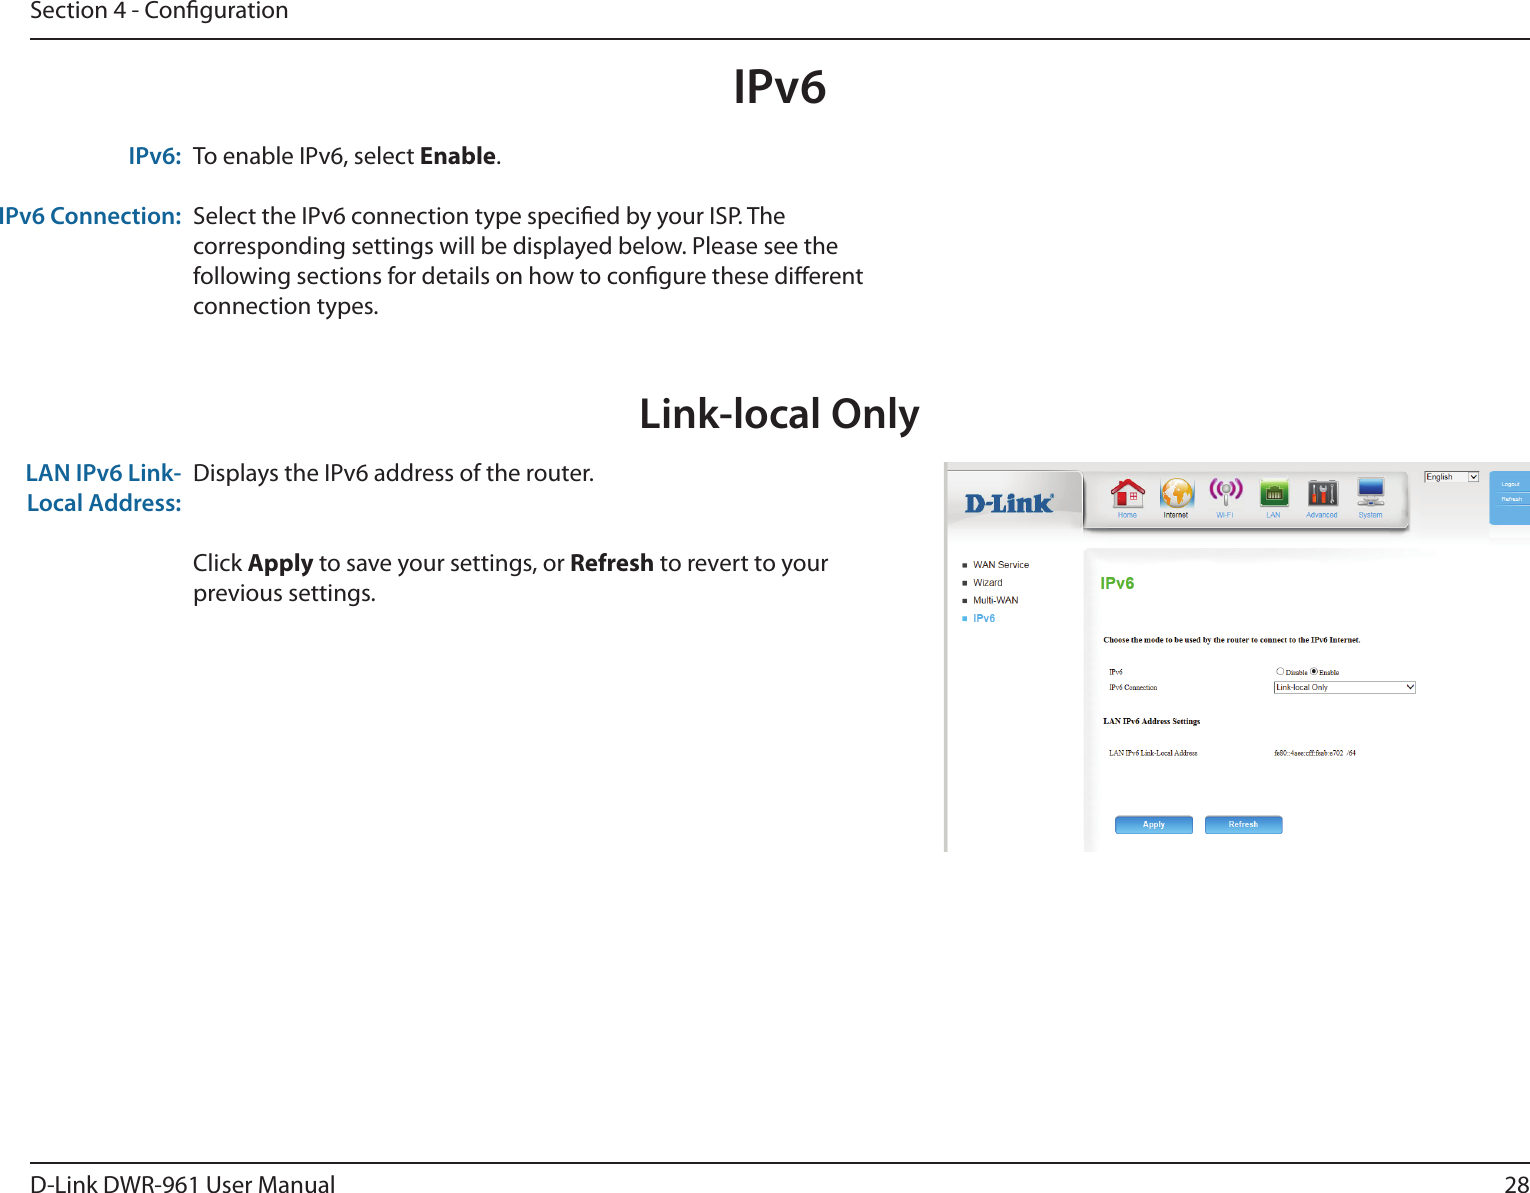 28D-Link DWR-961 User ManualSection 4 - CongurationIPv6Link-local OnlyDisplays the IPv6 address of the router.Click Apply to save your settings, or Refresh to revert to your previous settings.LAN IPv6 Link-Local Address:To enable IPv6, select Enable.Select the IPv6 connection type specied by your ISP. The corresponding settings will be displayed below. Please see the following sections for details on how to congure these dierent connection types.IPv6:IPv6 Connection: